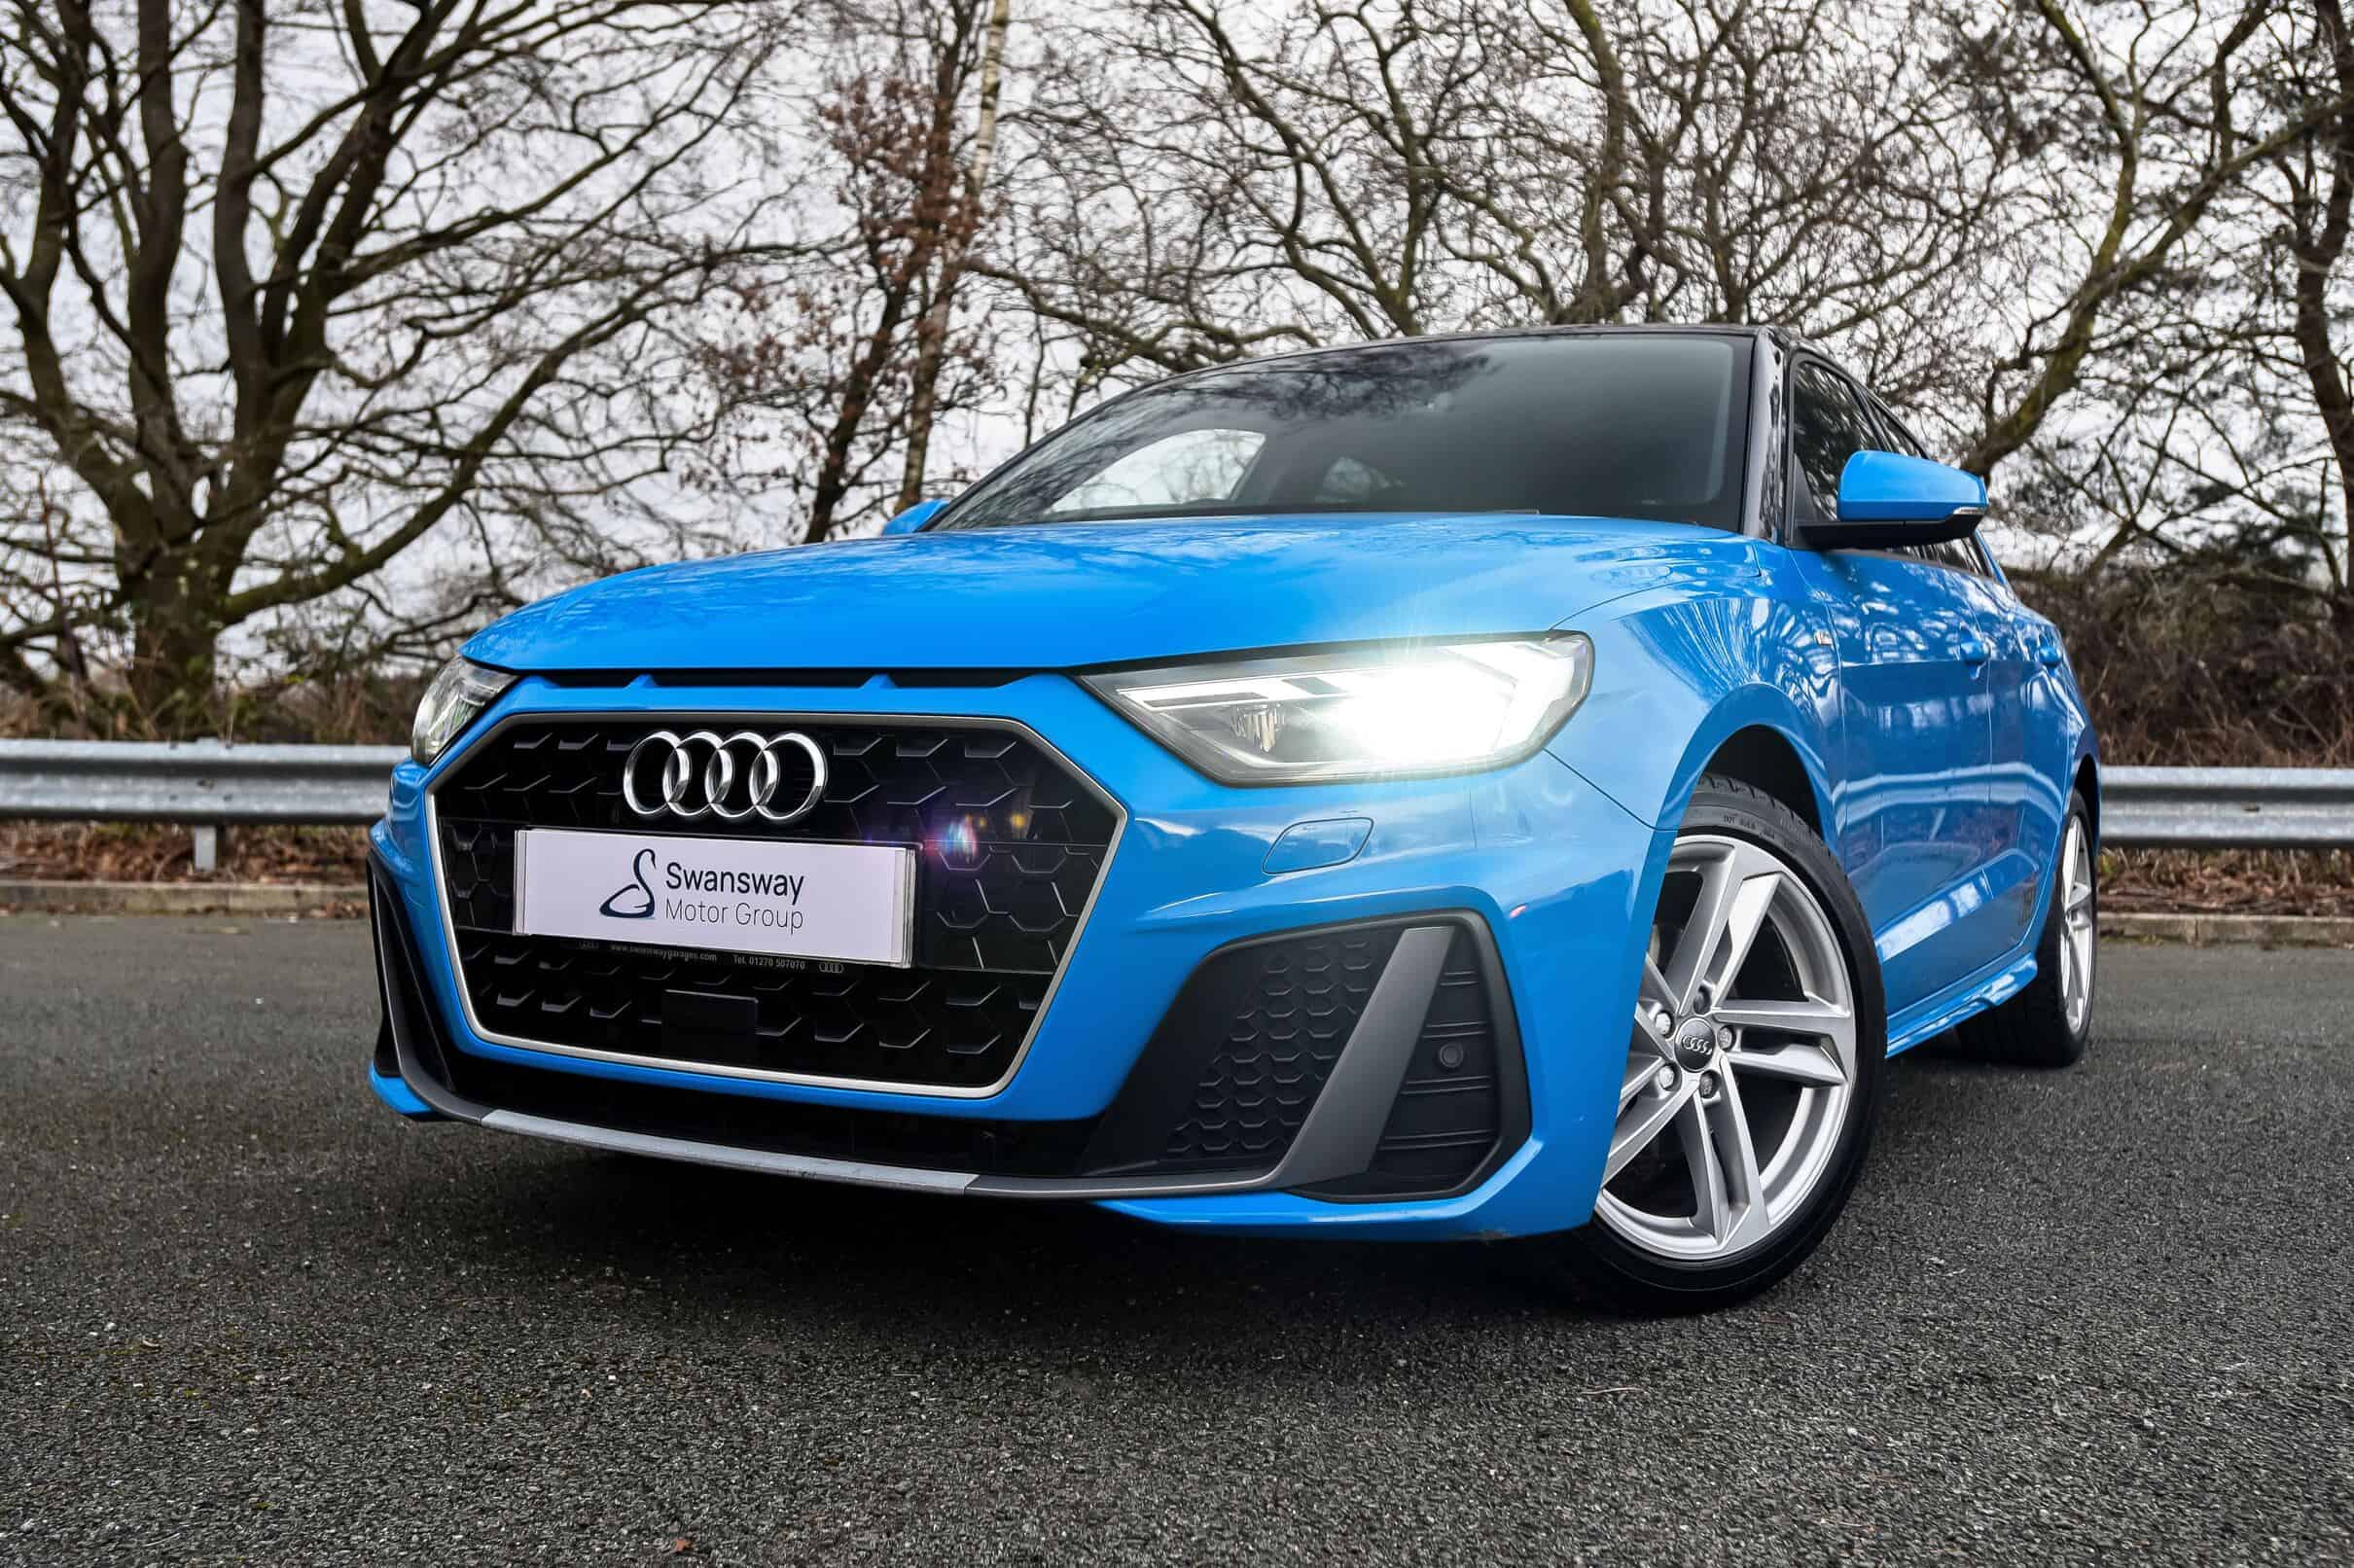 Mercedes Benz A Class vs Audi A1 - Which is Better